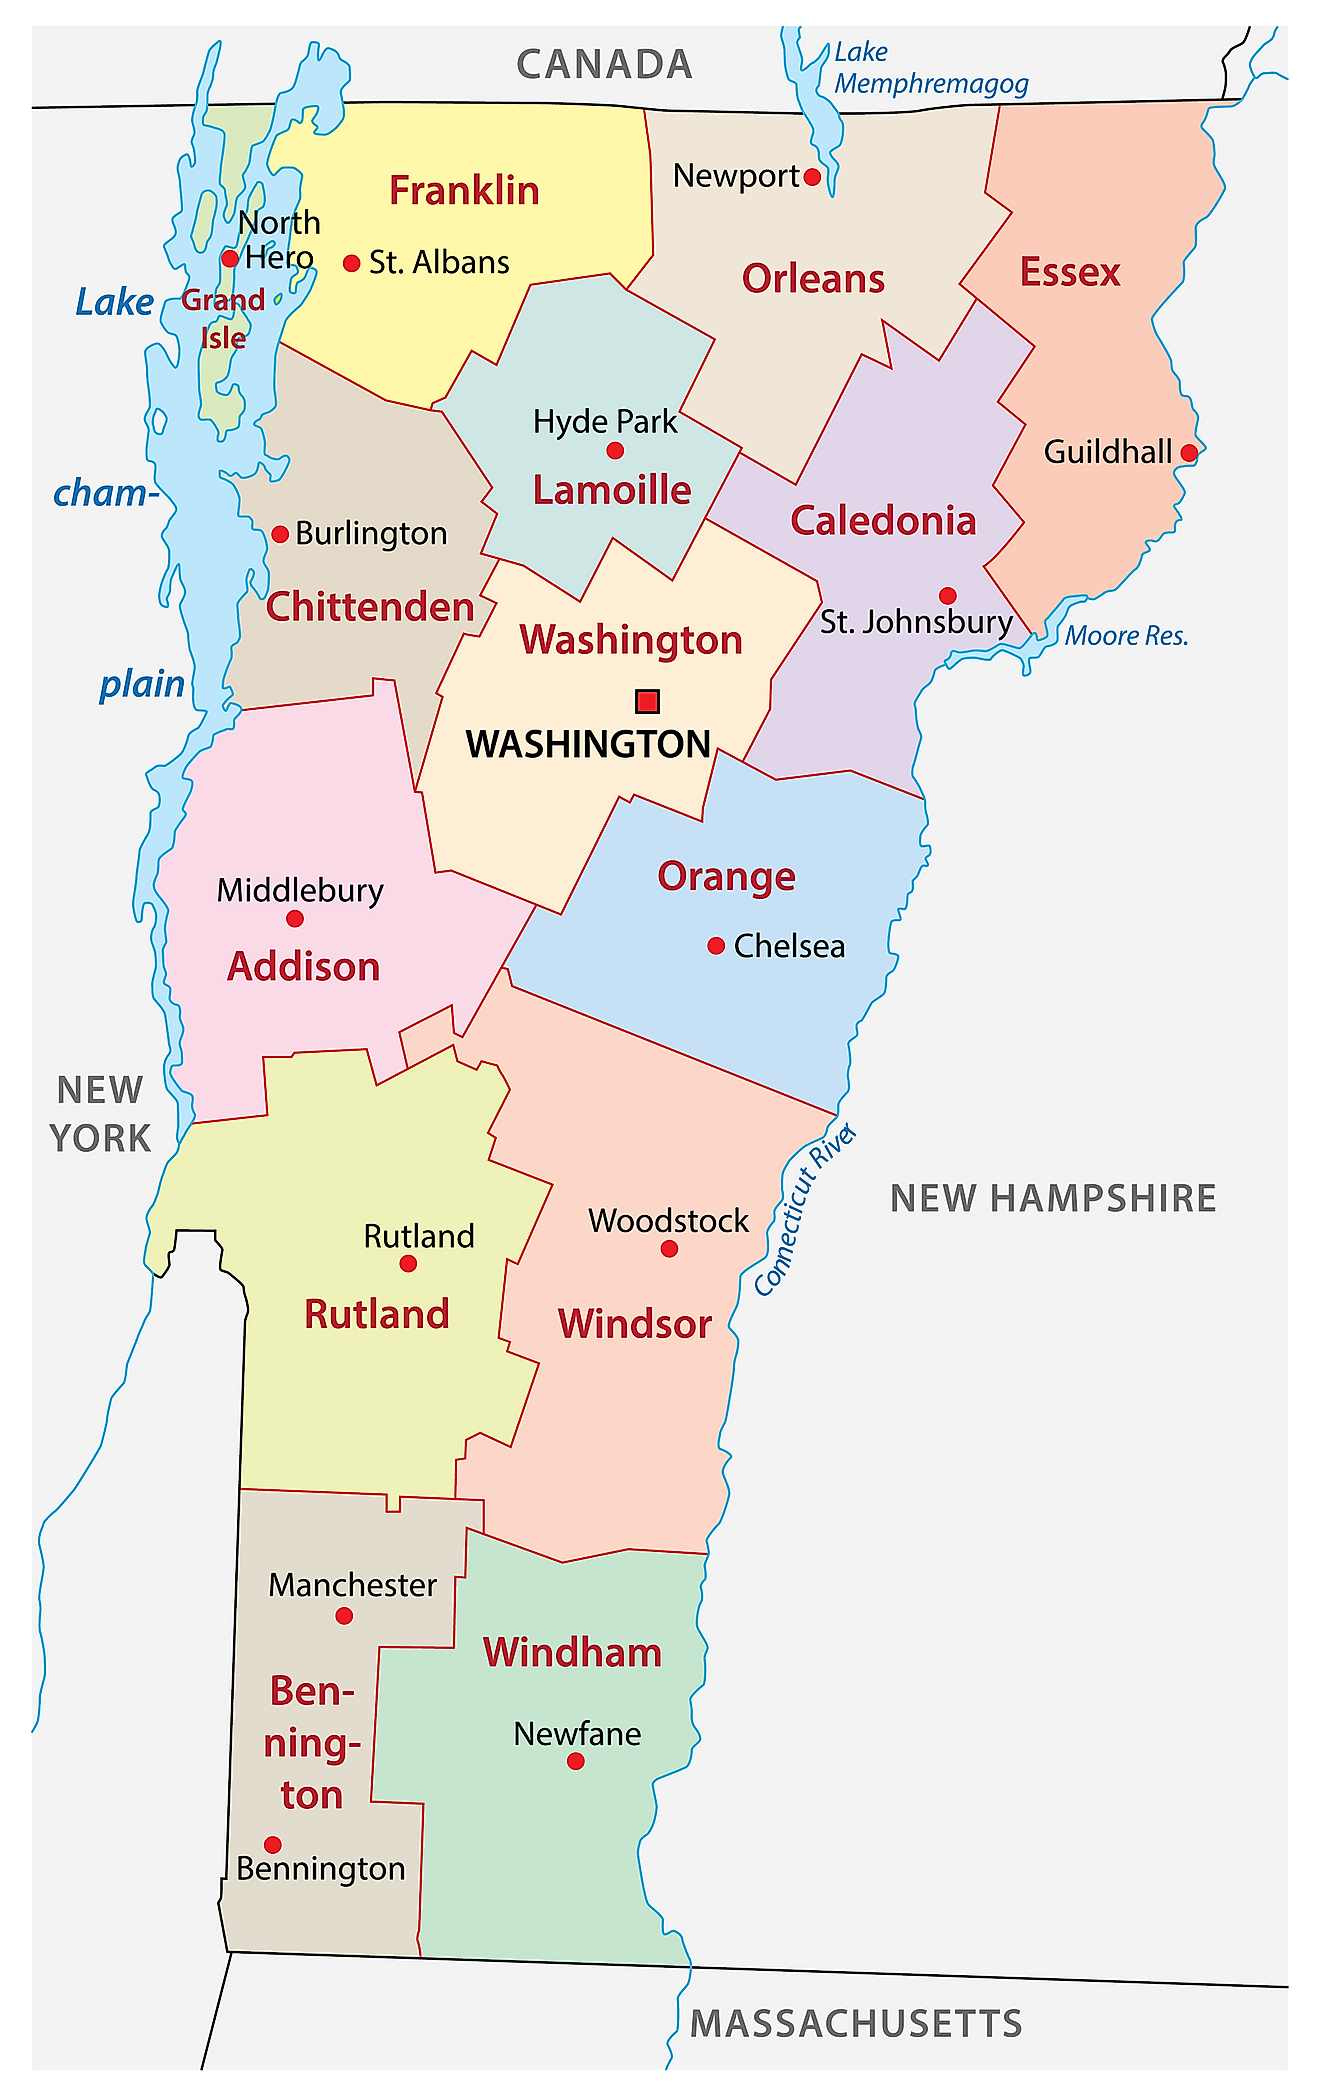 Administrative Map of Vermont showing its 14 counties and the capital city - Montpelier